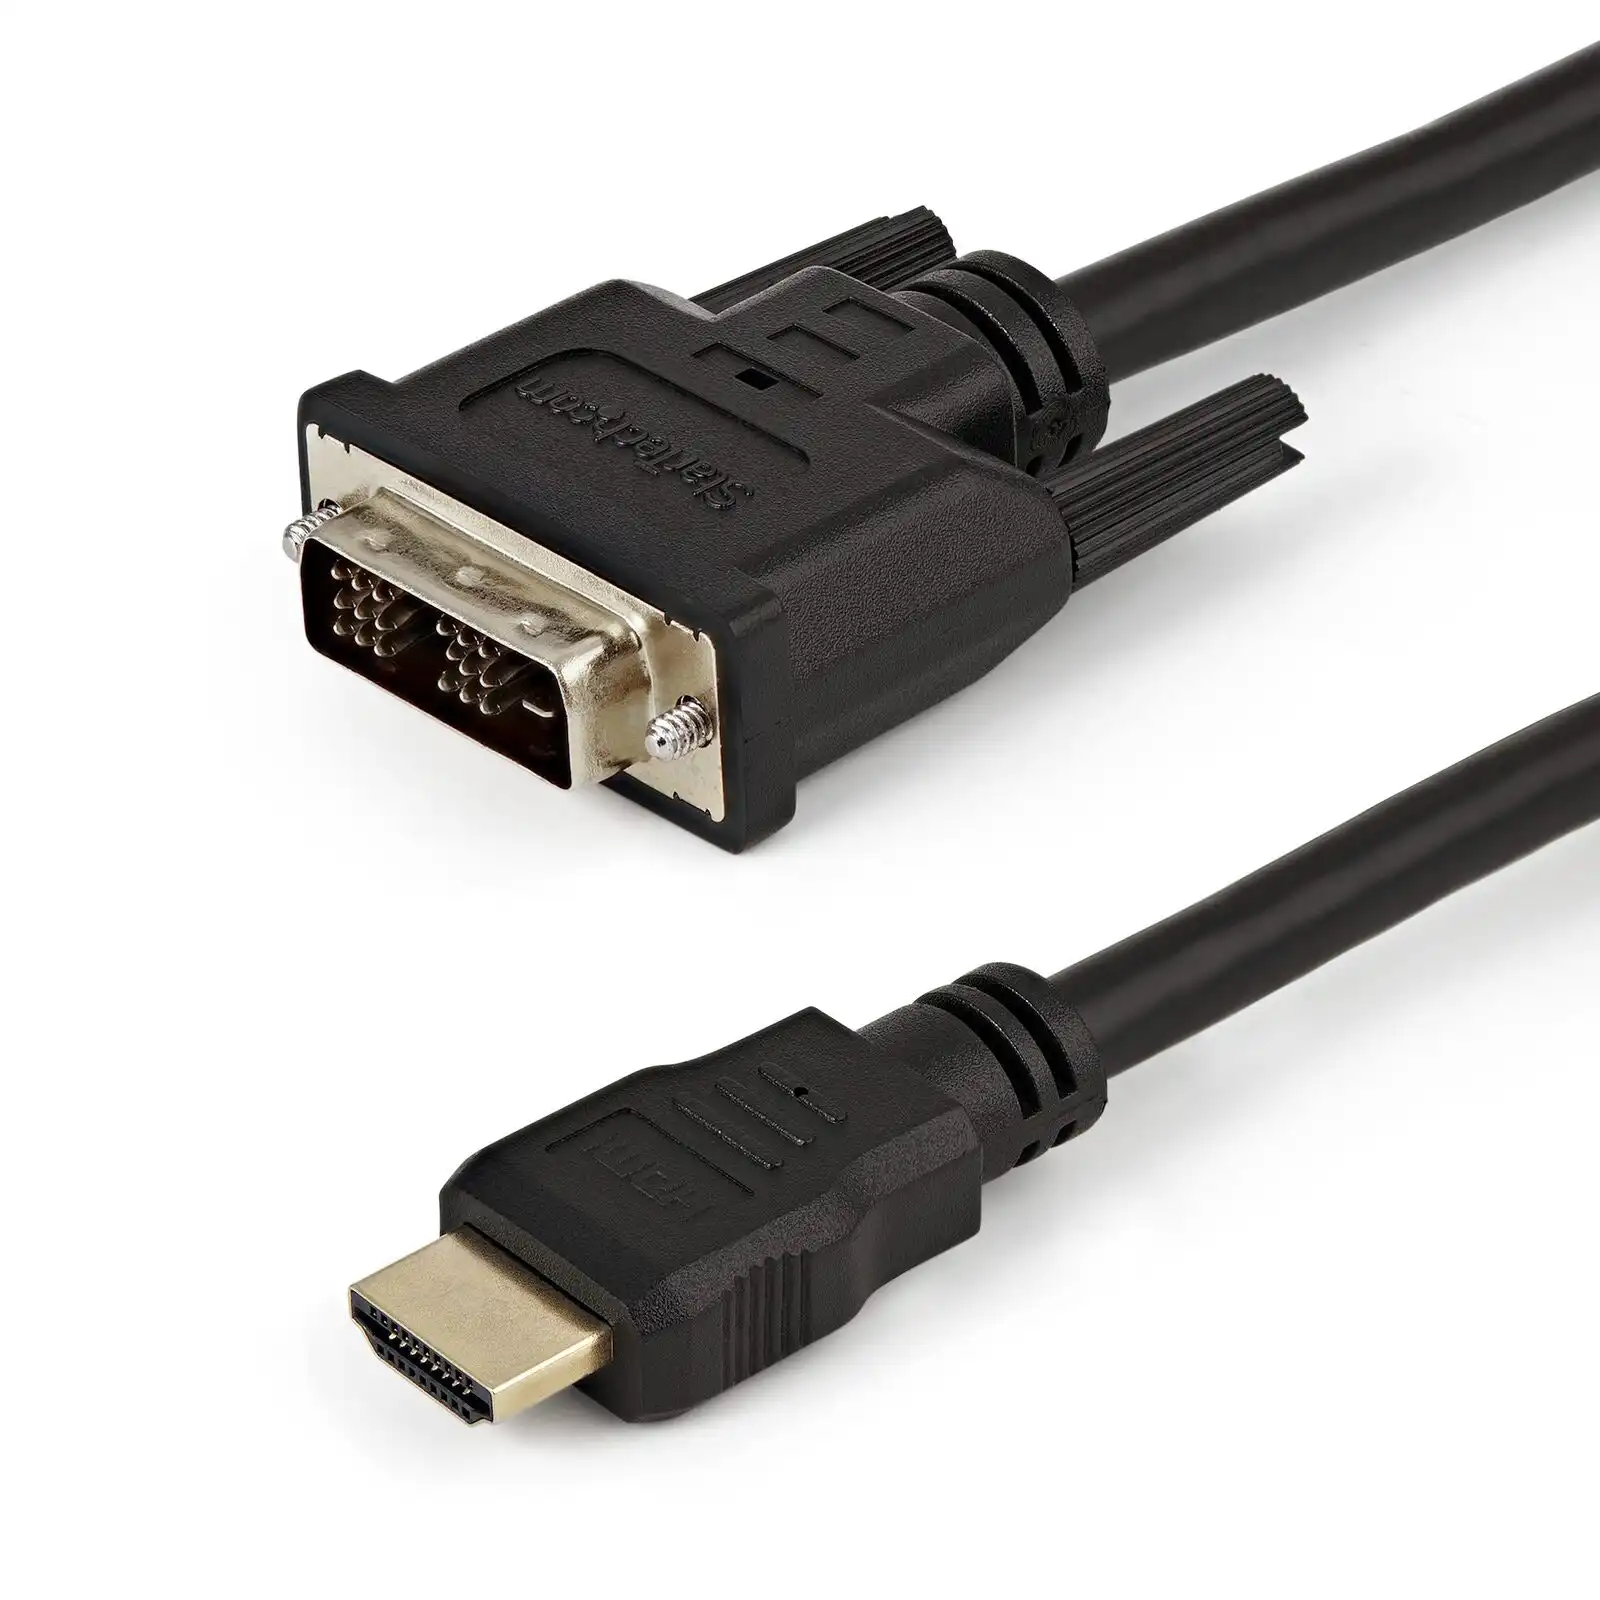  StarTech.com 8in HDMI to DVI-D Video Cable Adapter - HDMI  Female to DVI Male - HDMI to DVI Dongle Adapter Cable (HDDVIFM8IN),Black :  Electronics